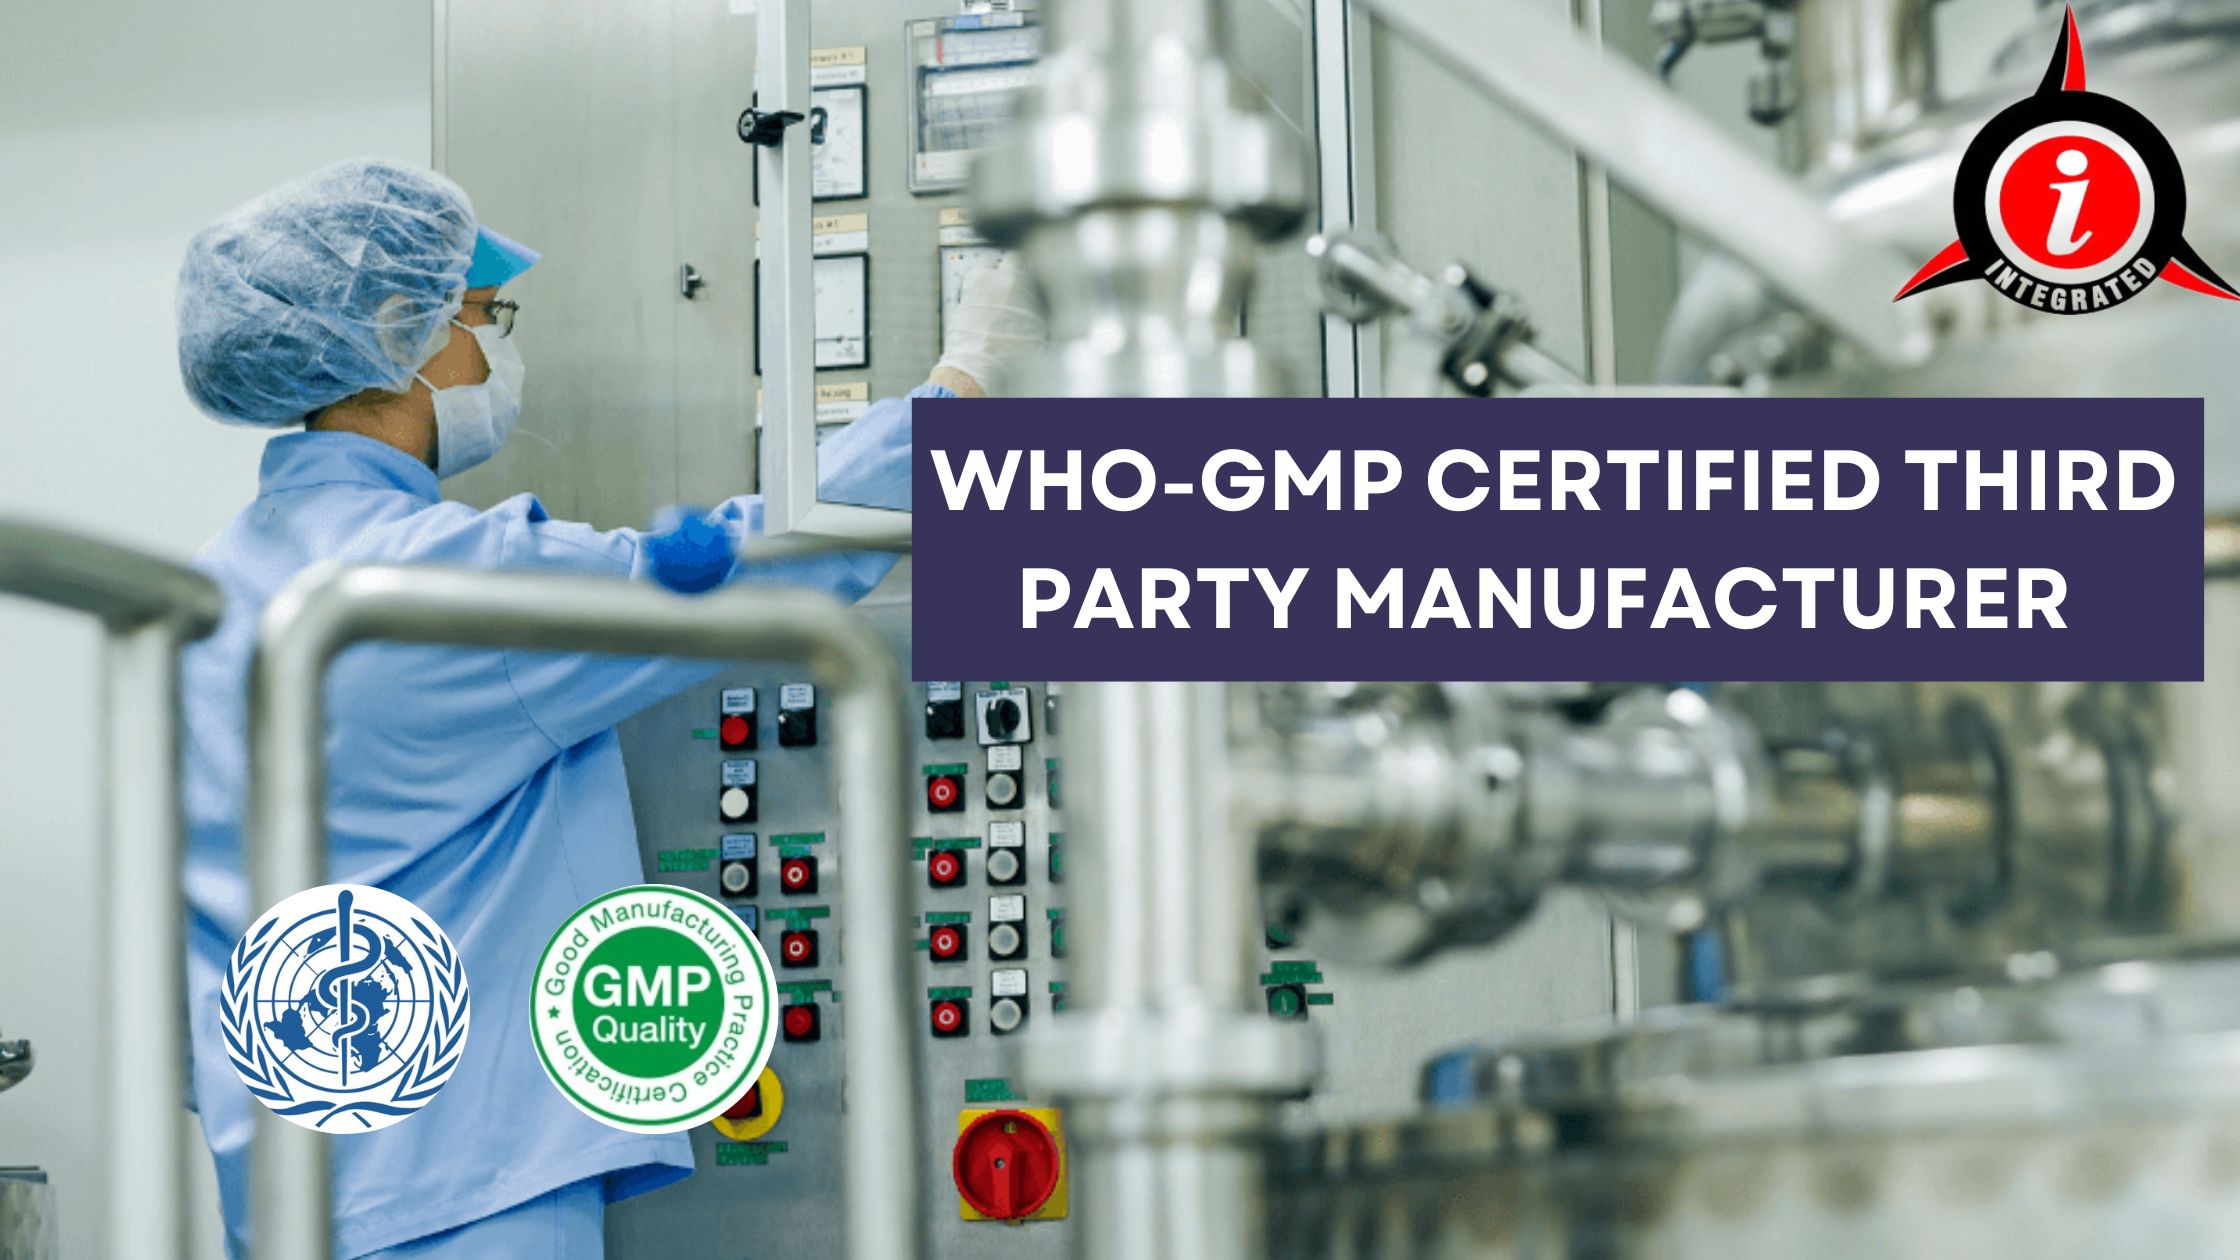 WHO-GMP Certified Third Party Manufacturer